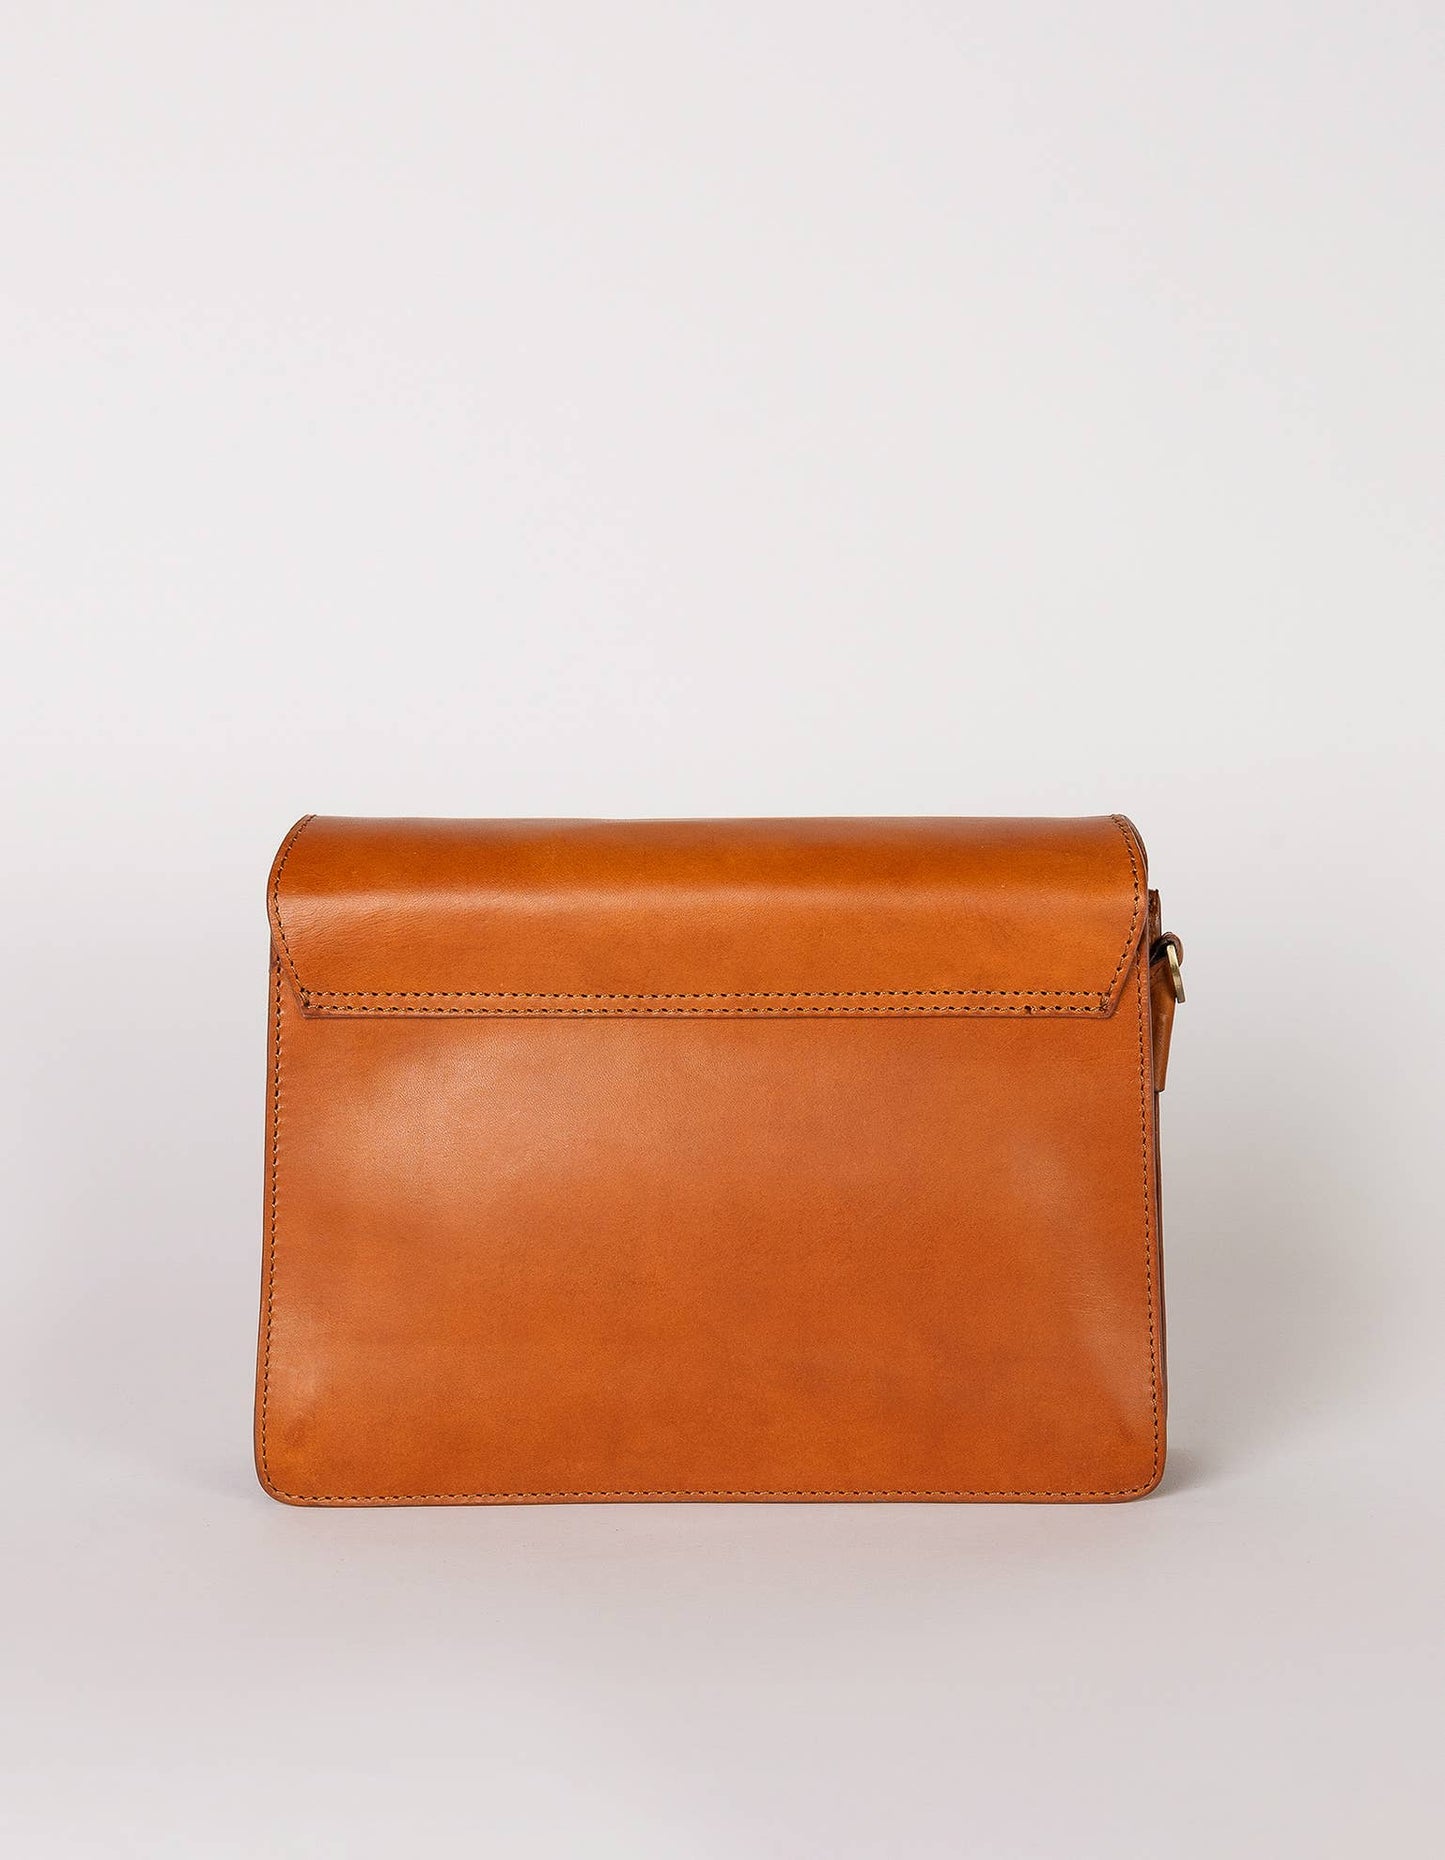 Leather Bag Harper - Cognac Classic Leather (two straps)